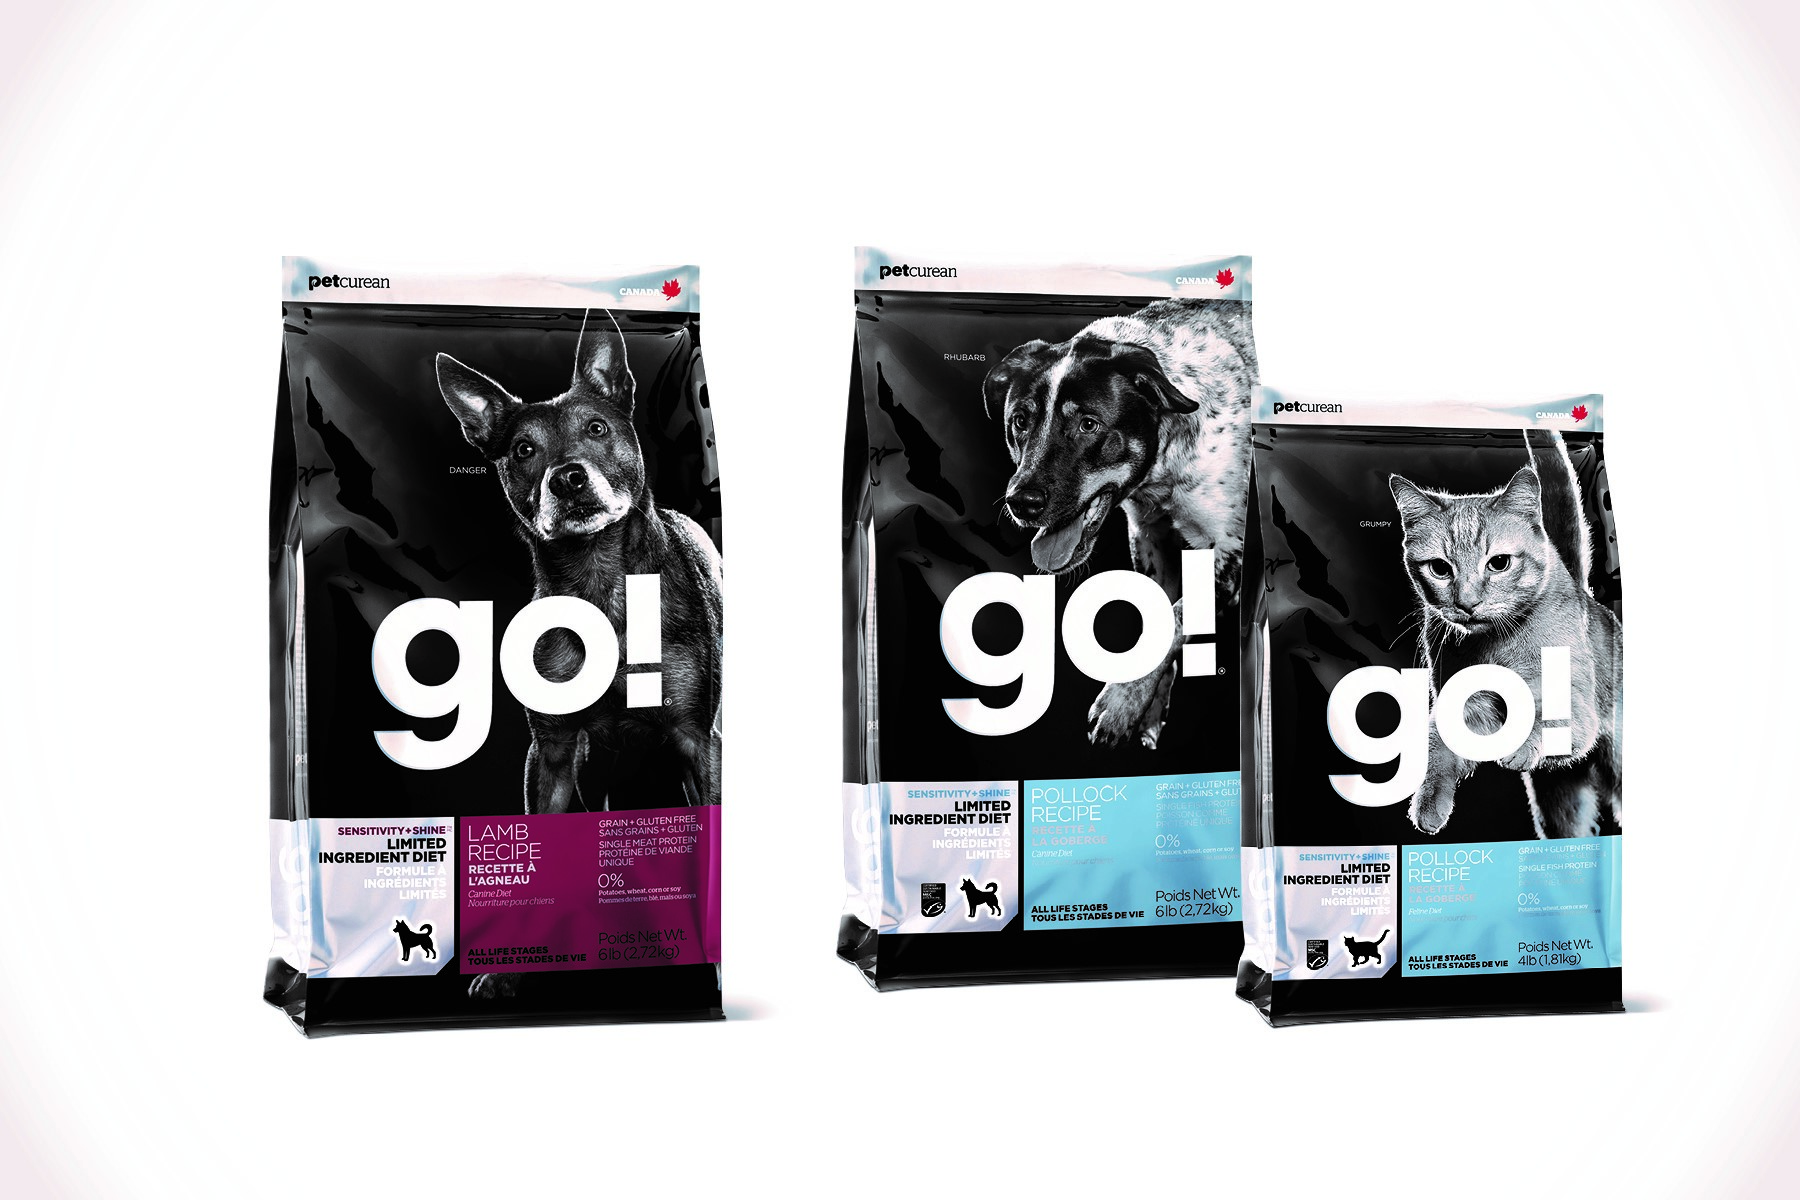 Help Your Pet Get up and Go With the GO! Limited Ingredient and Diet Line